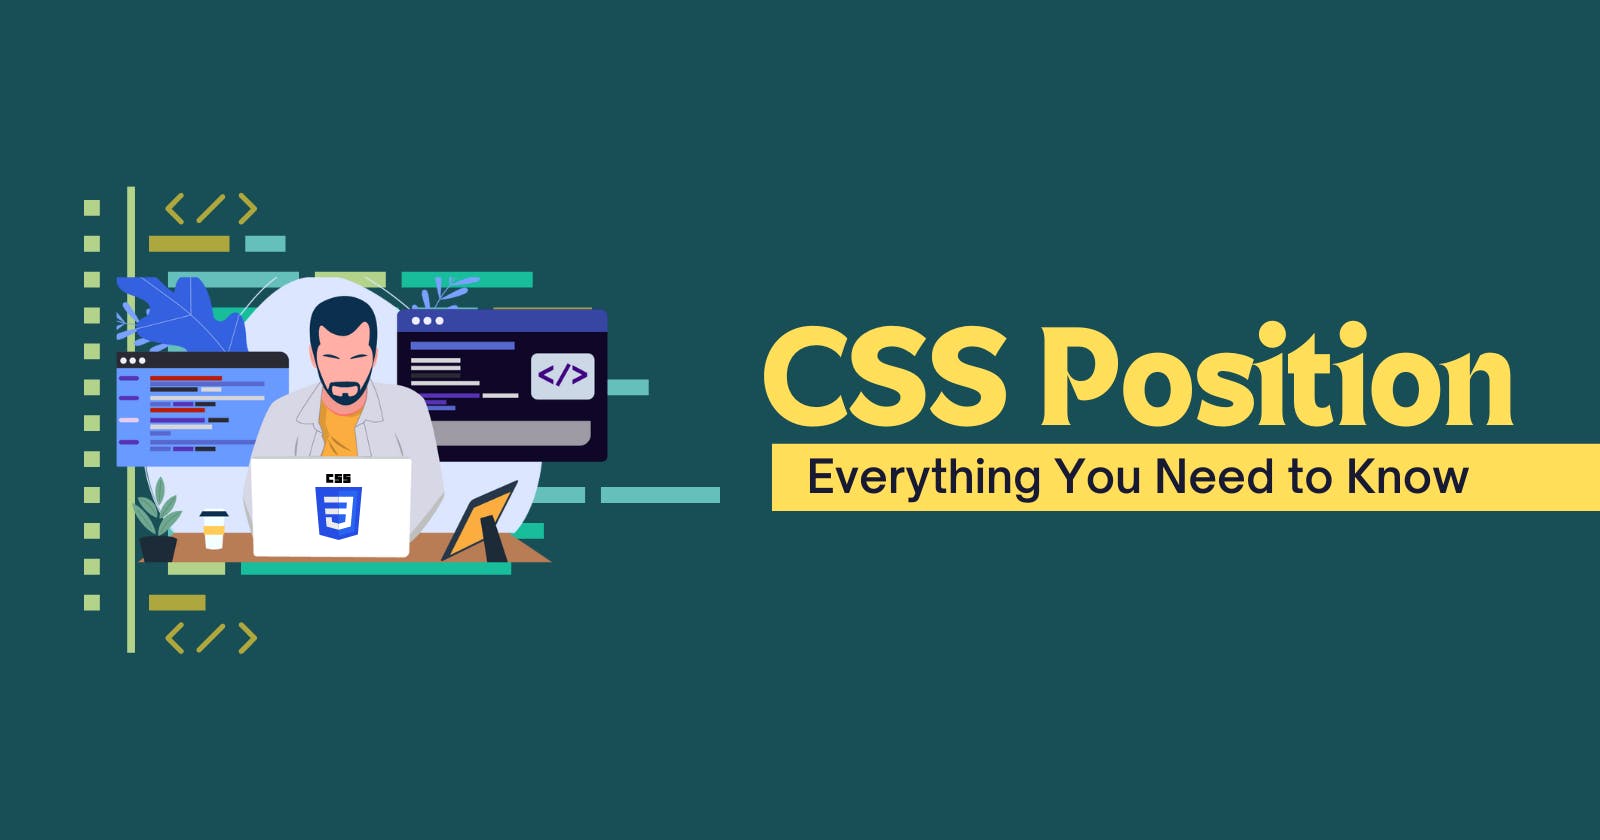 CSS Position: The Beginners Guide